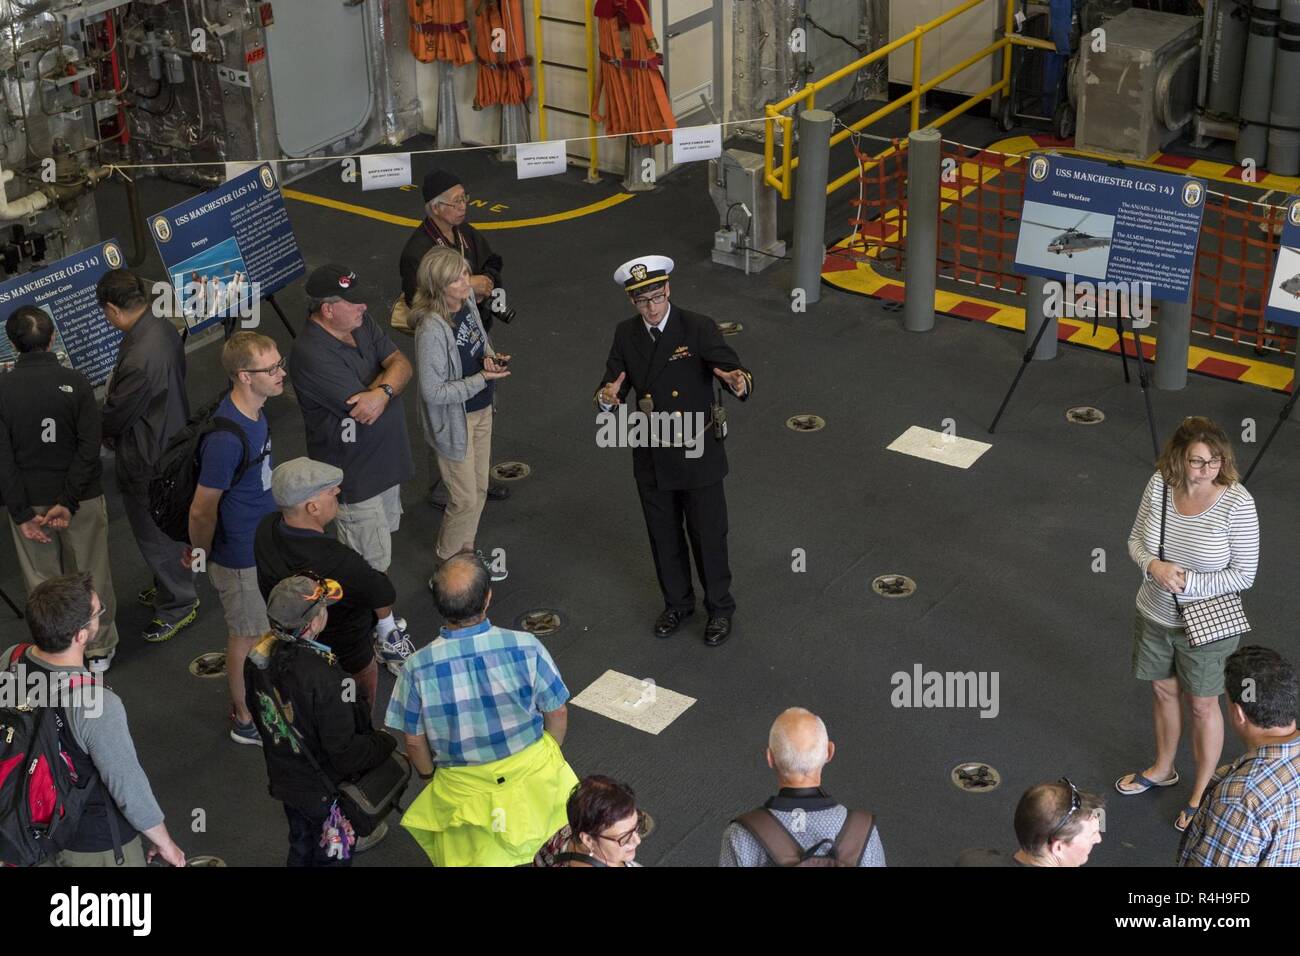 SAN FRANCISCO (Oct. 3, 2018) Lt. Adam Schalk gives a guided public tour of the Independence-variant littoral combat ship USS Manchester (LCS 14) during San Francisco Fleet Week (SFFW) 2018. SFFW is an opportunity for the American public to meet their Navy, Marine Corps and Coast Guard teams and experience America's sea services. During fleet week, service members participate in various community service events, showcase capabilities and equipment to the community, and enjoy the hospitality of San Francisco and its surrounding areas. Stock Photo